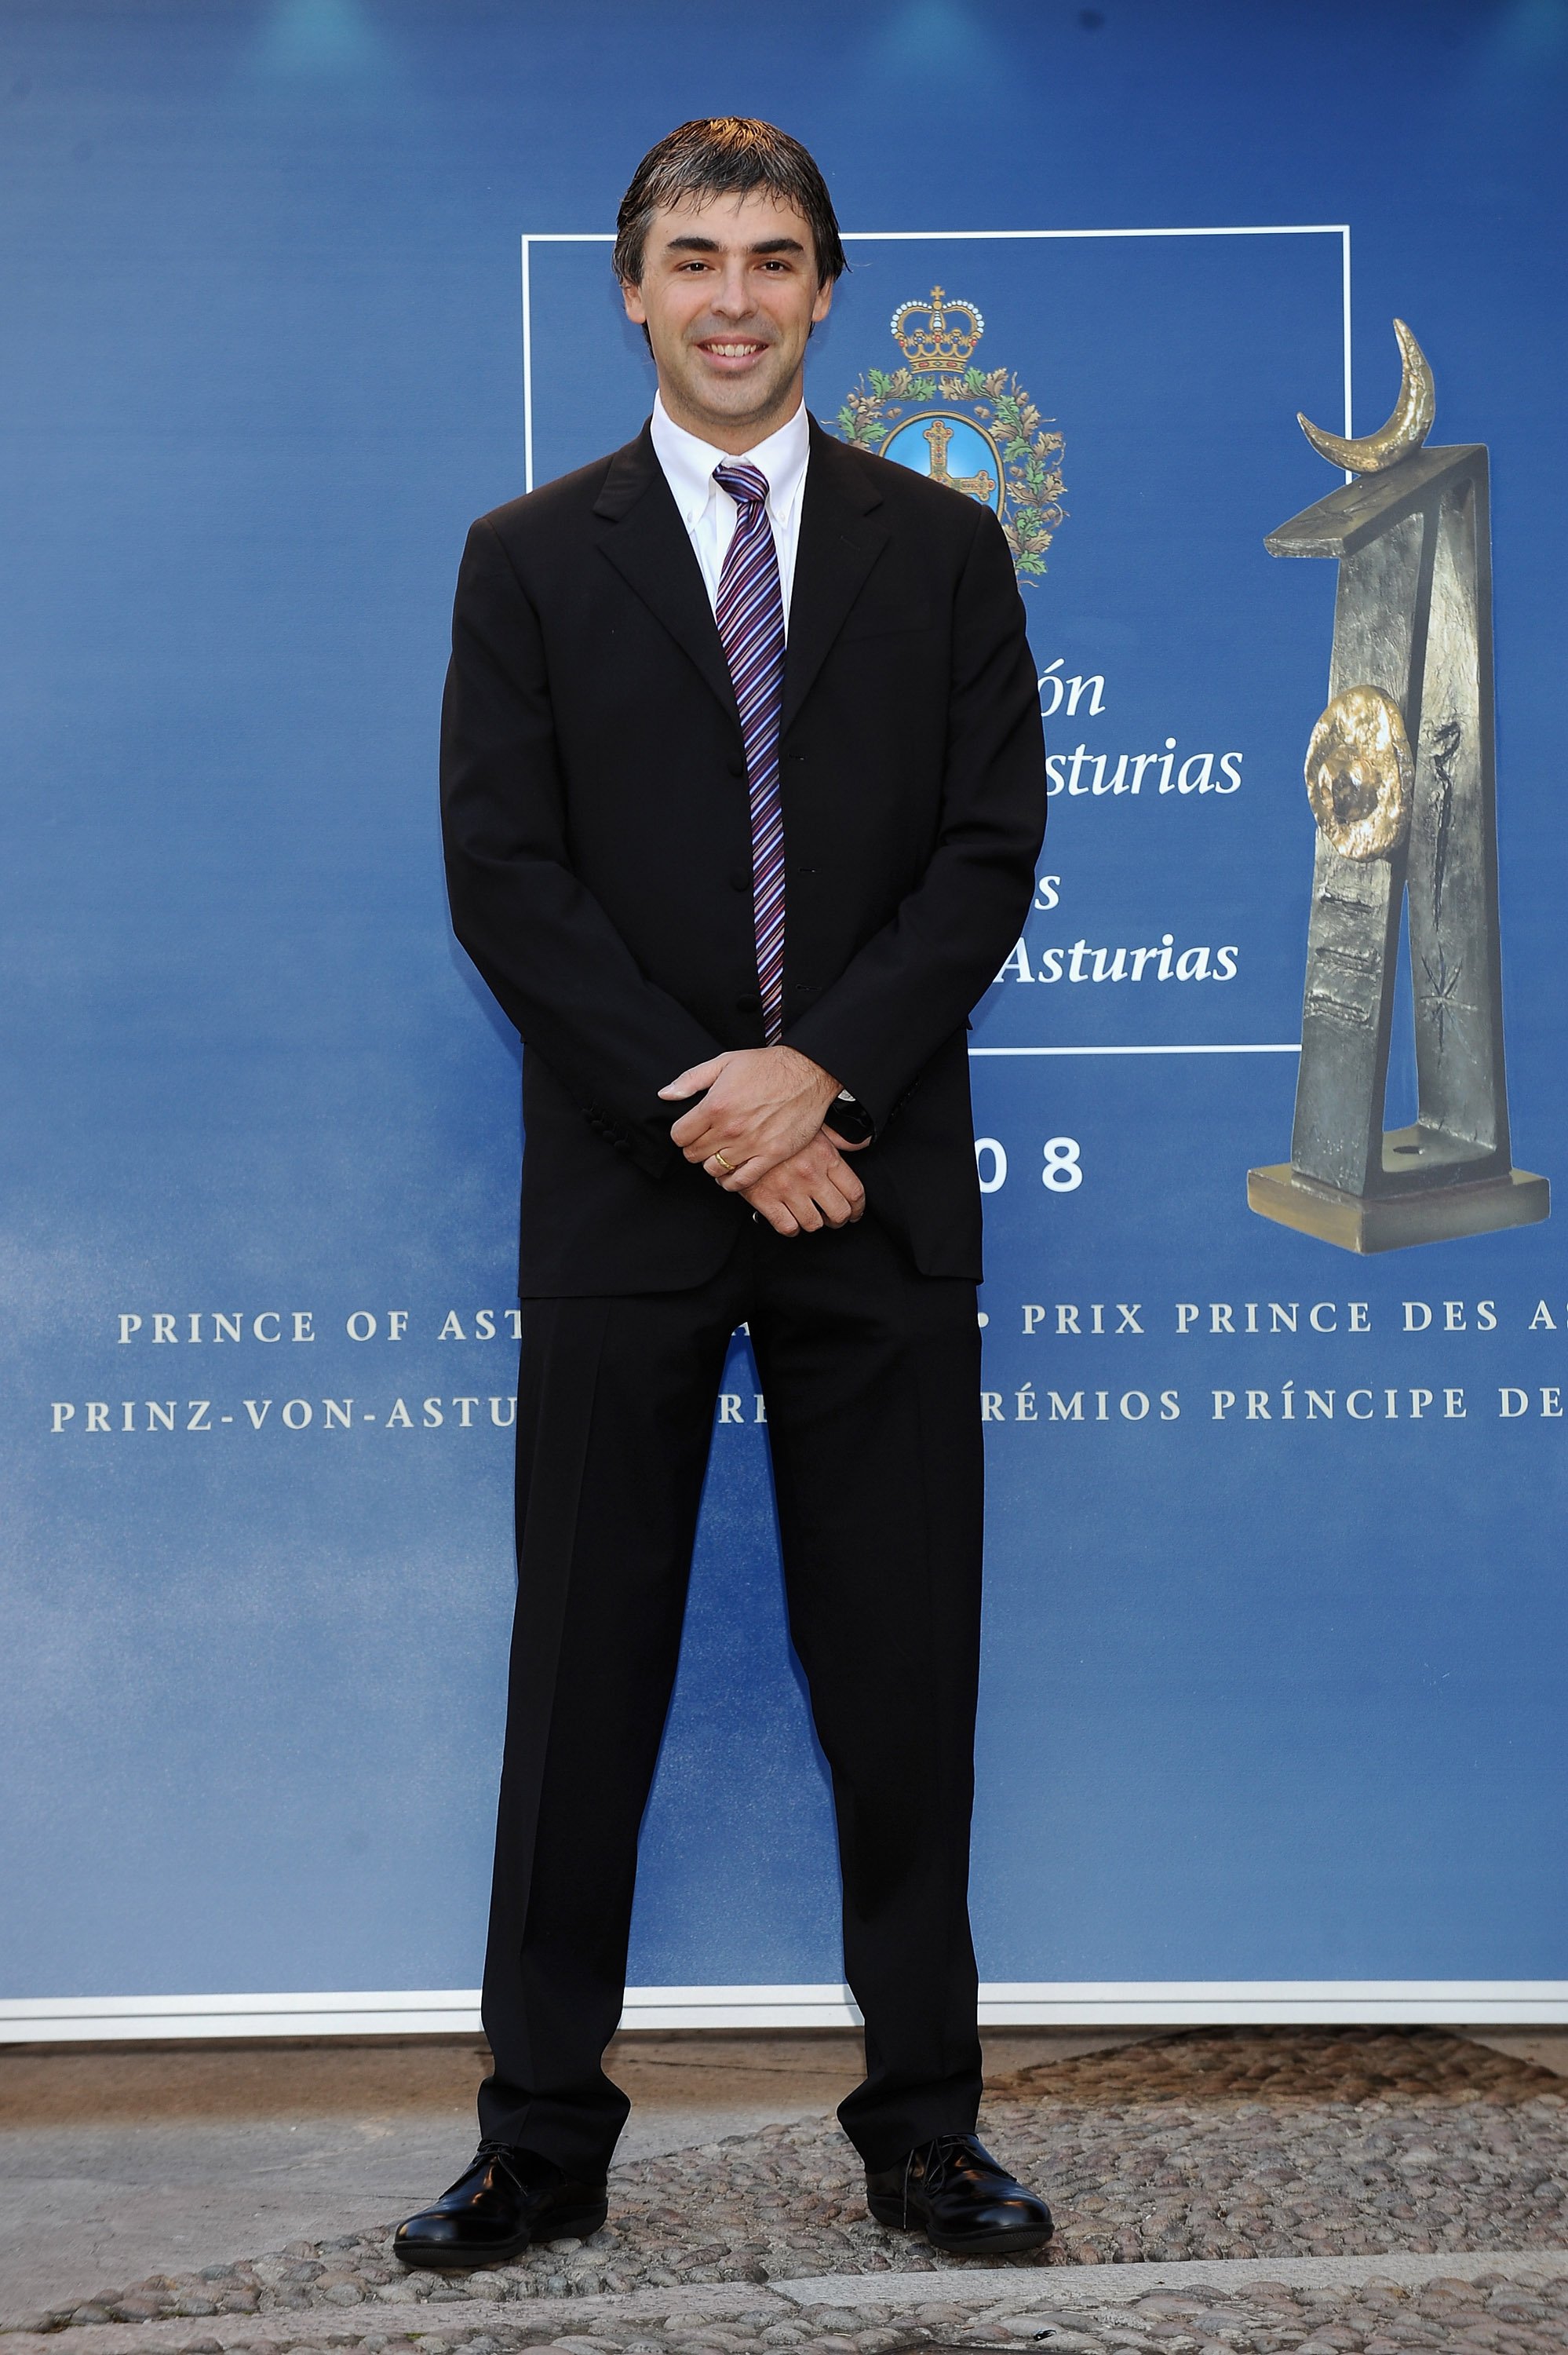 Larry Page posing for a picture in Oviedo, Spain, on October 24, 2008 | Source: Getty Images